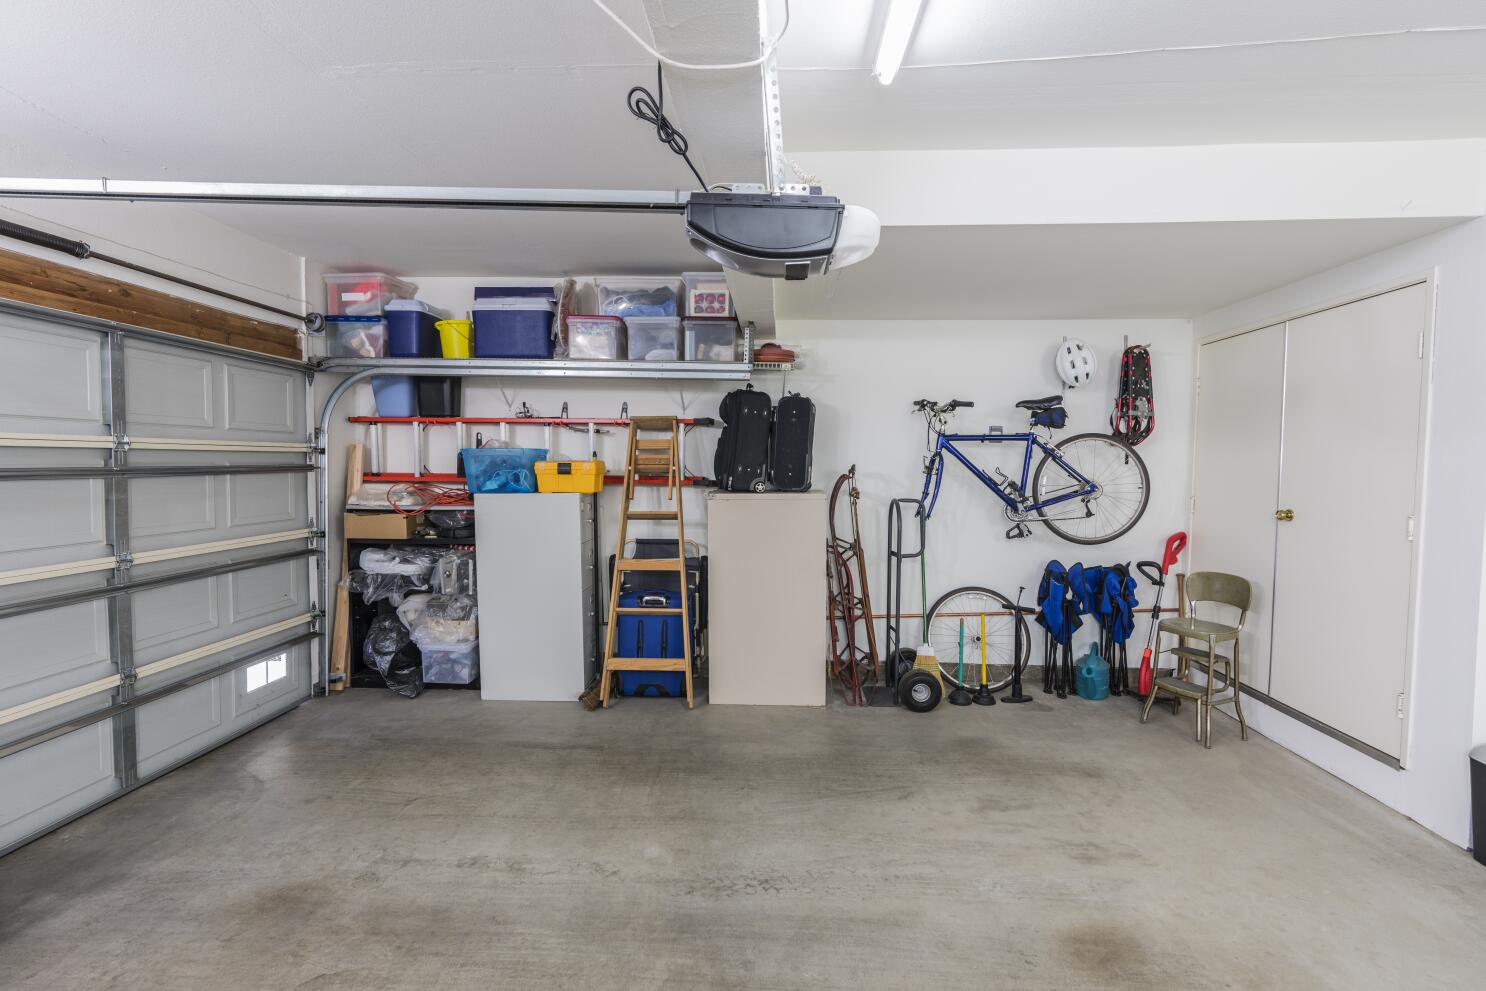 Spring has Sprung.. Time for Project Garage Organization